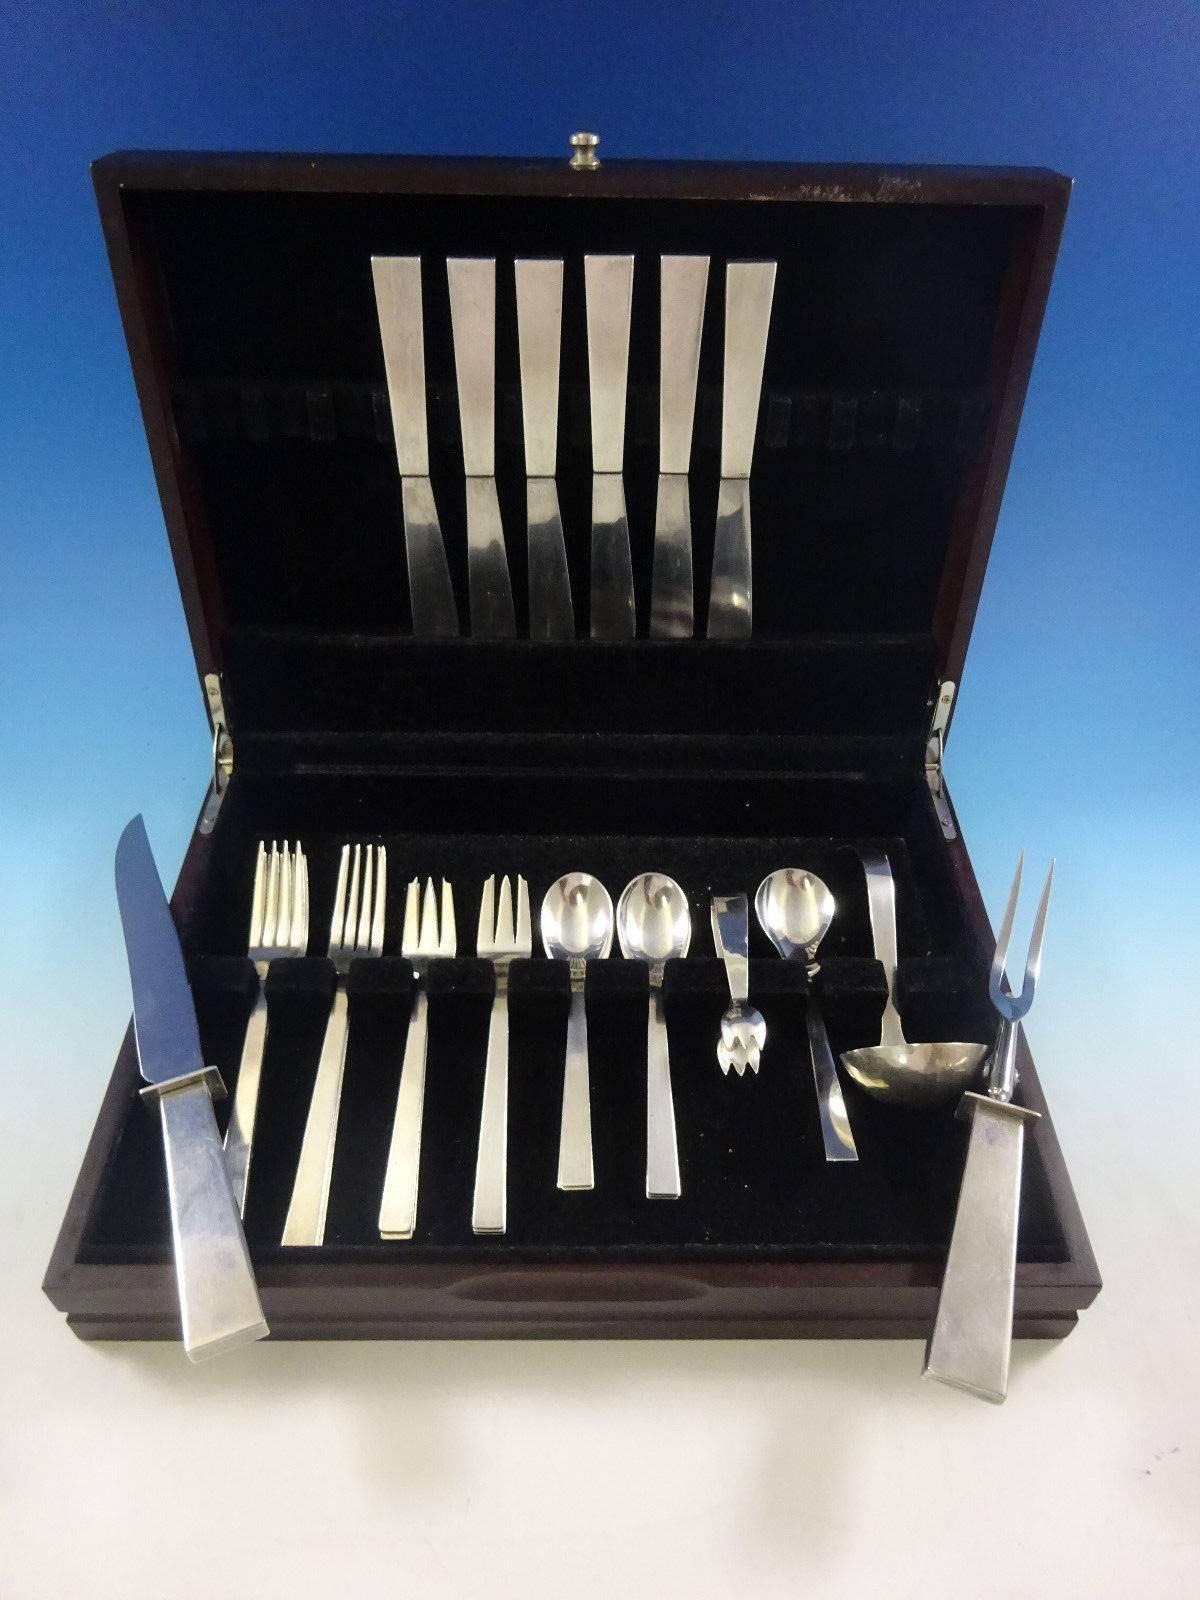 Moderne by Adra sterling silver flatware set of 29 pieces. This set includes: 

Six knives, 9